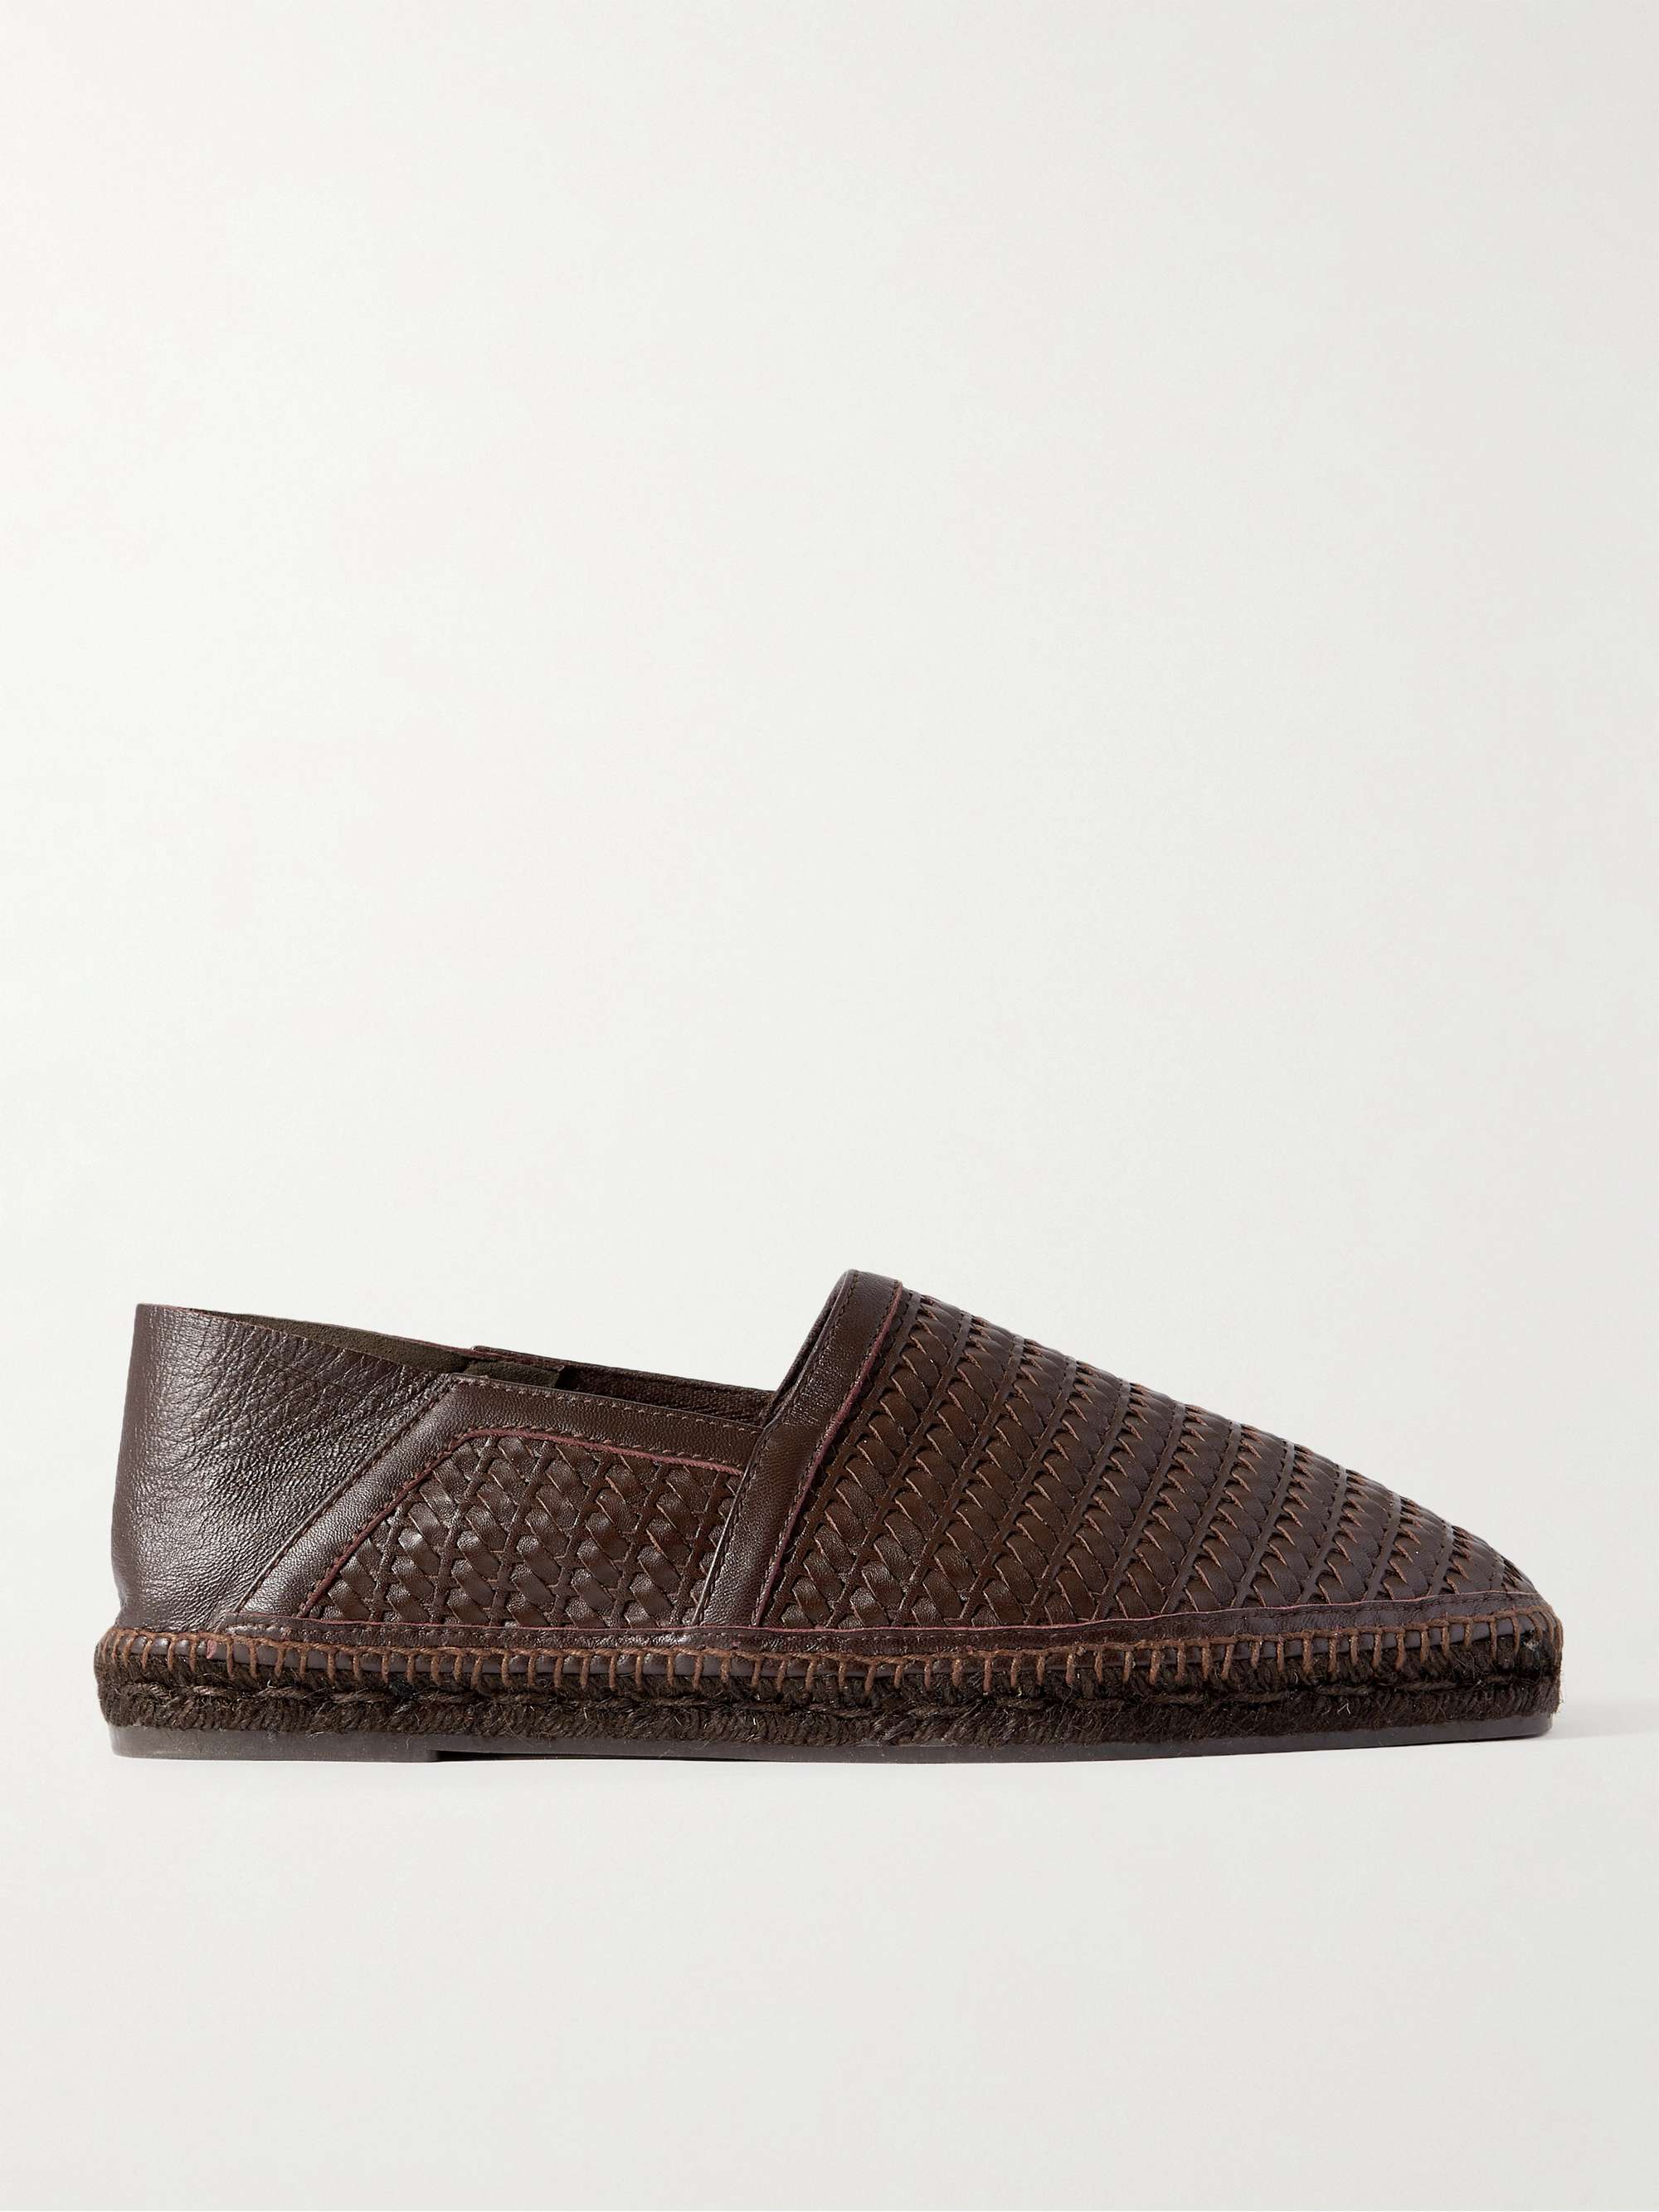 TOM FORD Barnes Collapsible-Heel Woven Leather Espadrilles